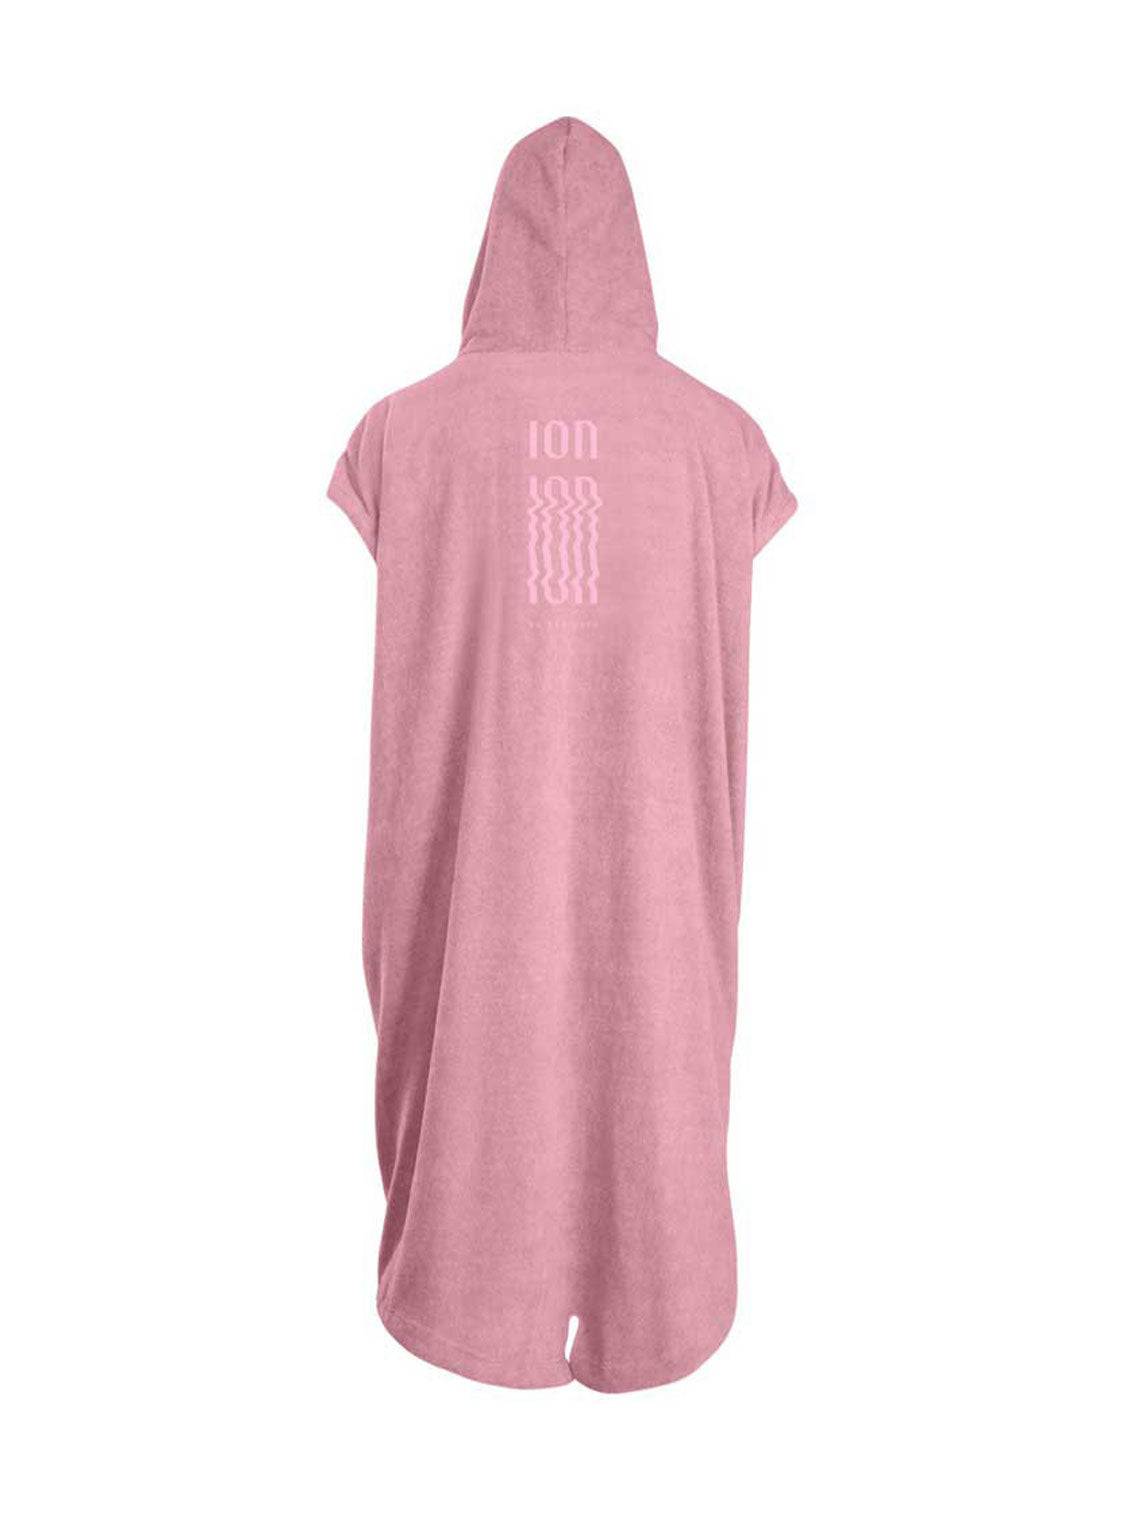 Poncho ION Core Dirty Rose - S